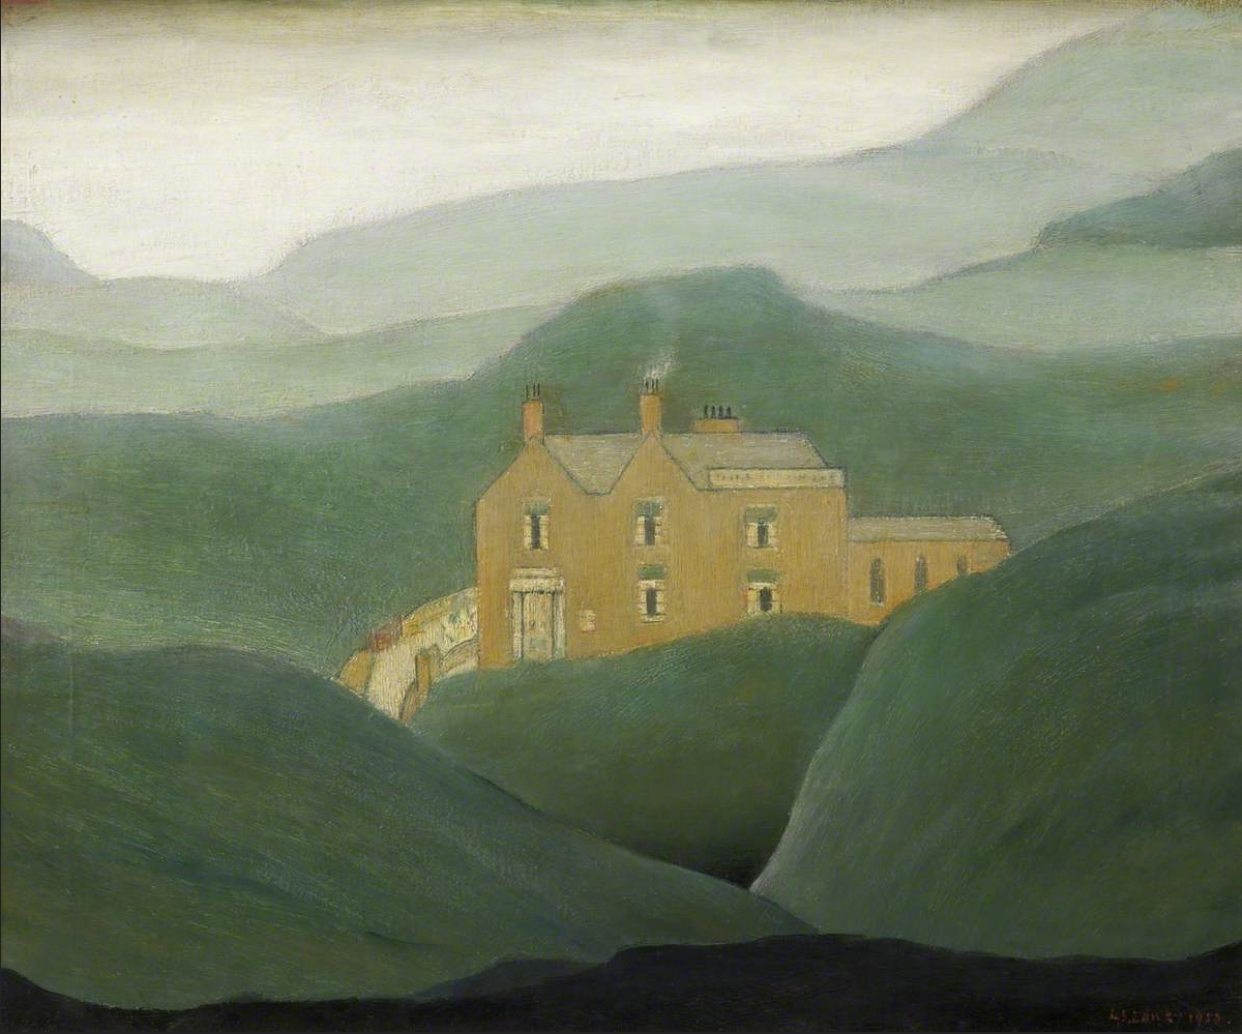 House on the Moor (1950) by Laurence Stephen Lowry (1887 - 1976), English artist.